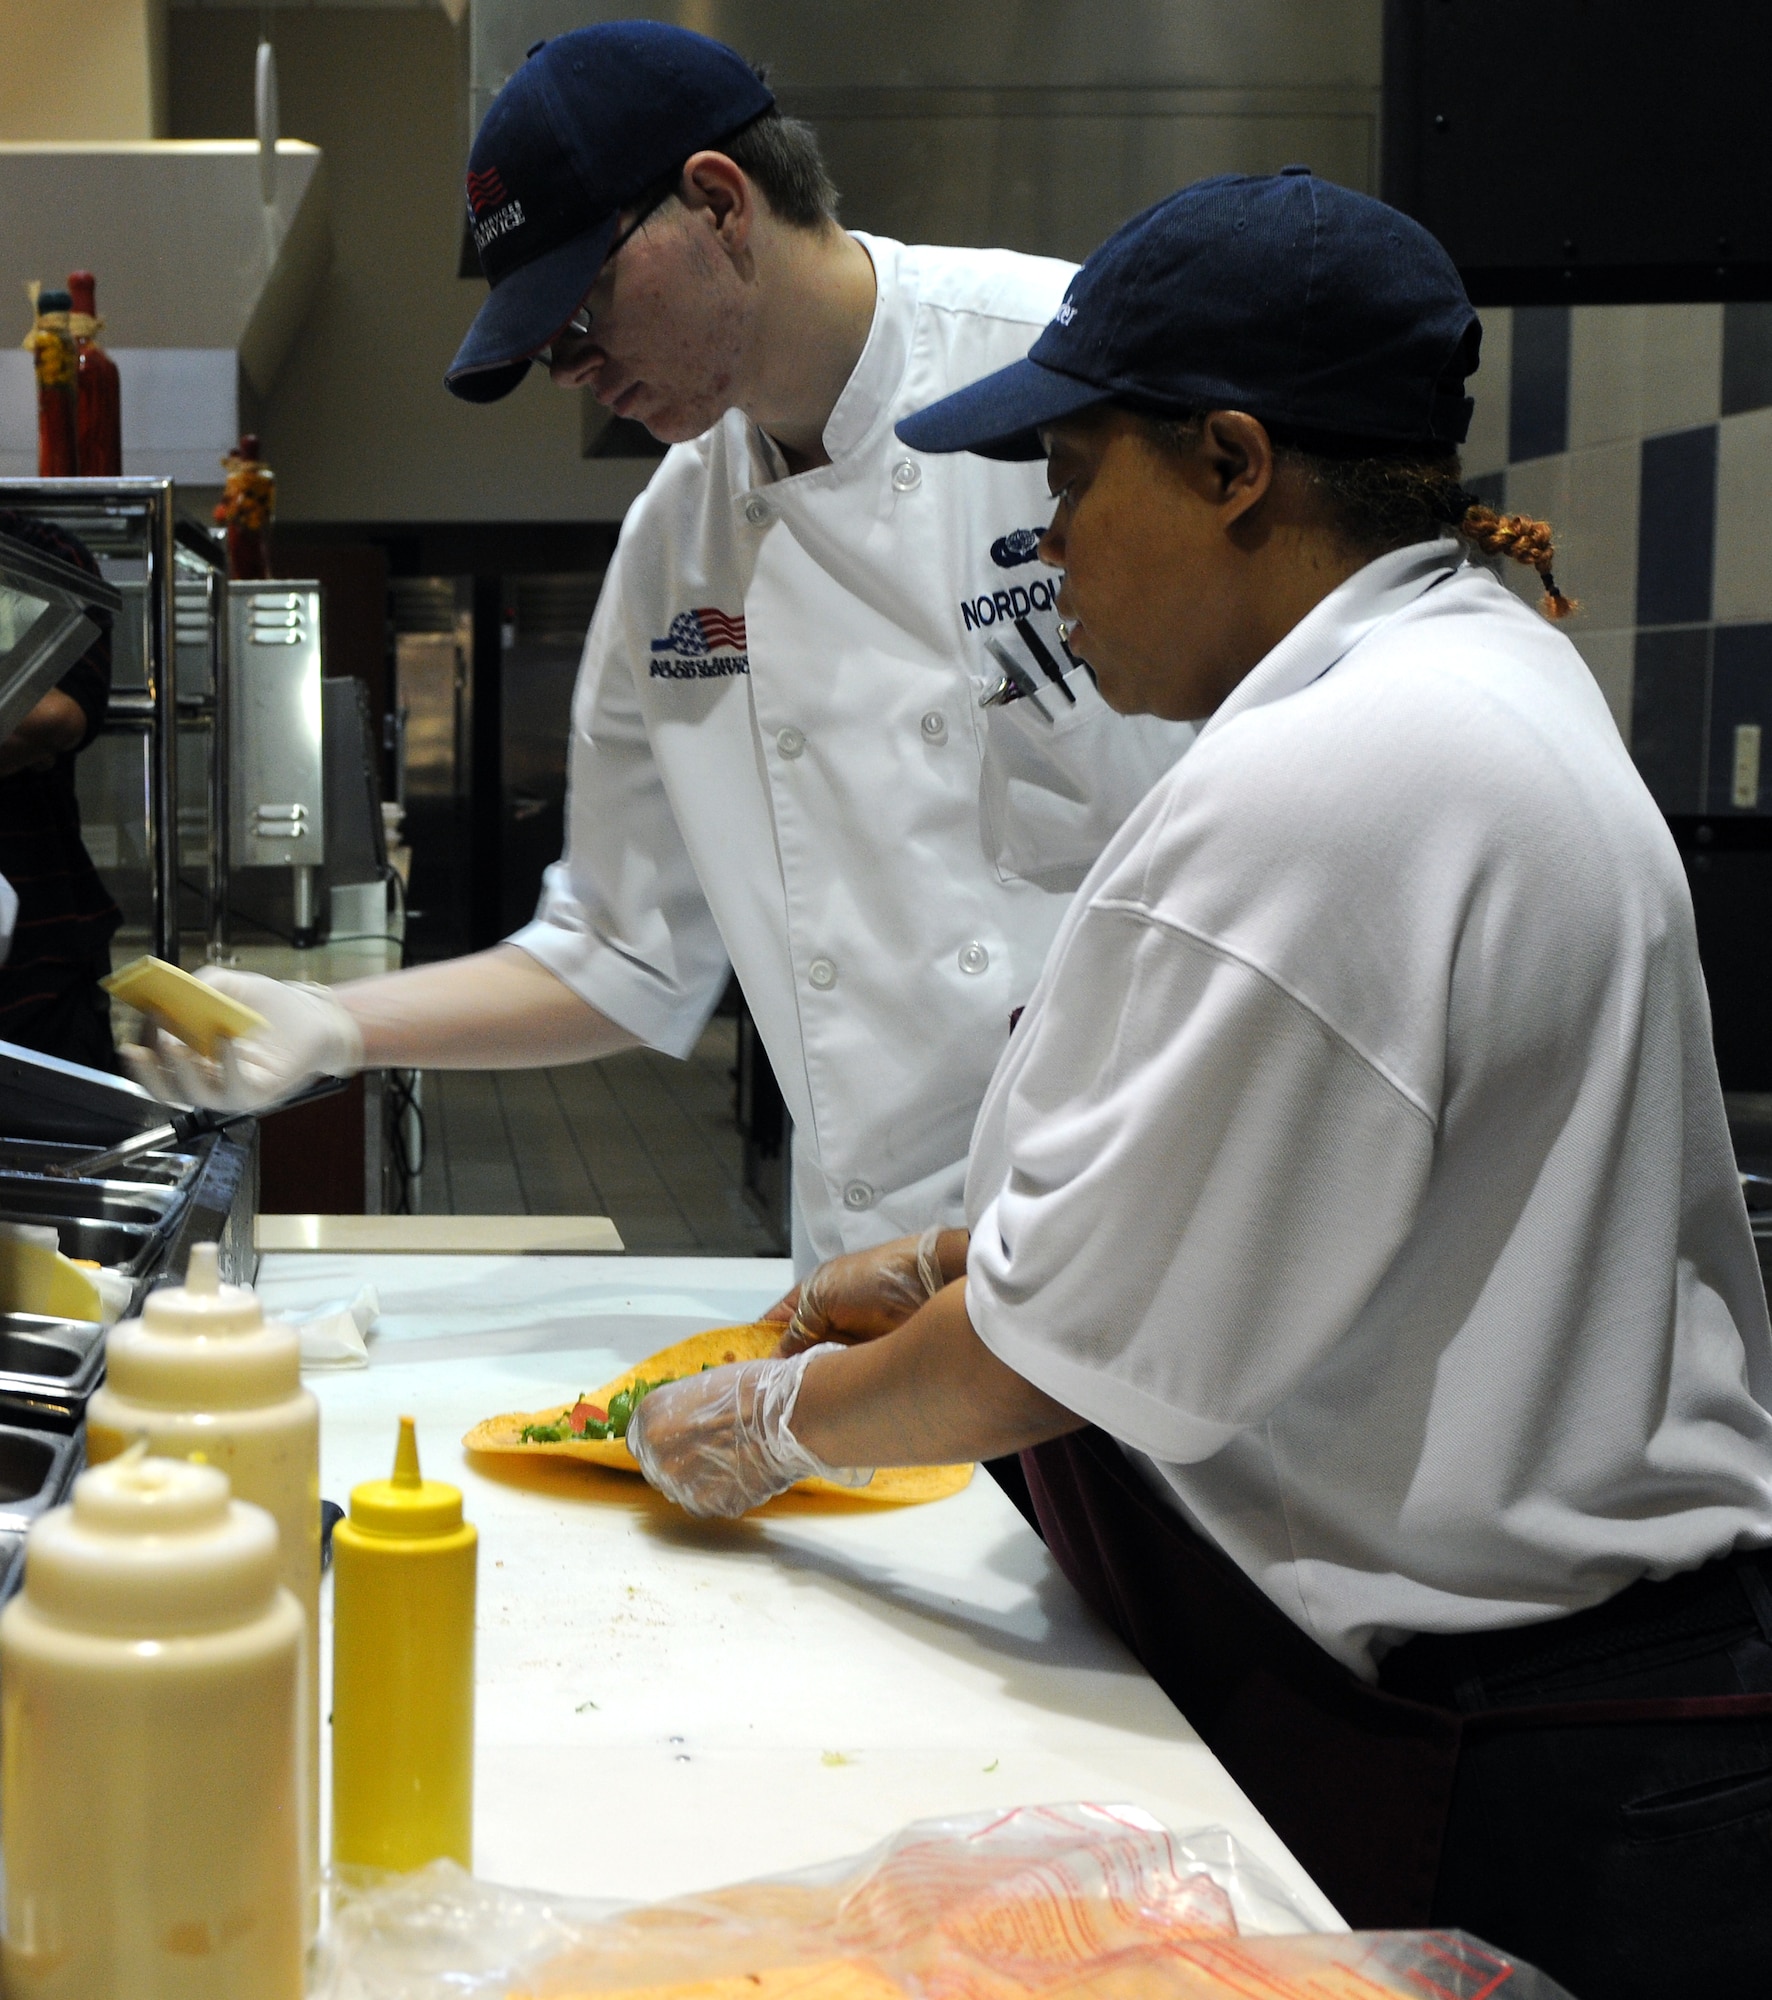 Barbie Jackson (foreground) and Airman 1st Class Larry Nordquest, both 19th Force Support Squadron food service cooks, prepare wraps and sandwiches for lunchtime meals Aug. 23 at the Hercules Dining Facility. The dining facility opened at its current location in October 2009 and has served more than 21,500 meals each month to meal card holders and other authorized users. (Courtesy photo by Ashley Mangin)